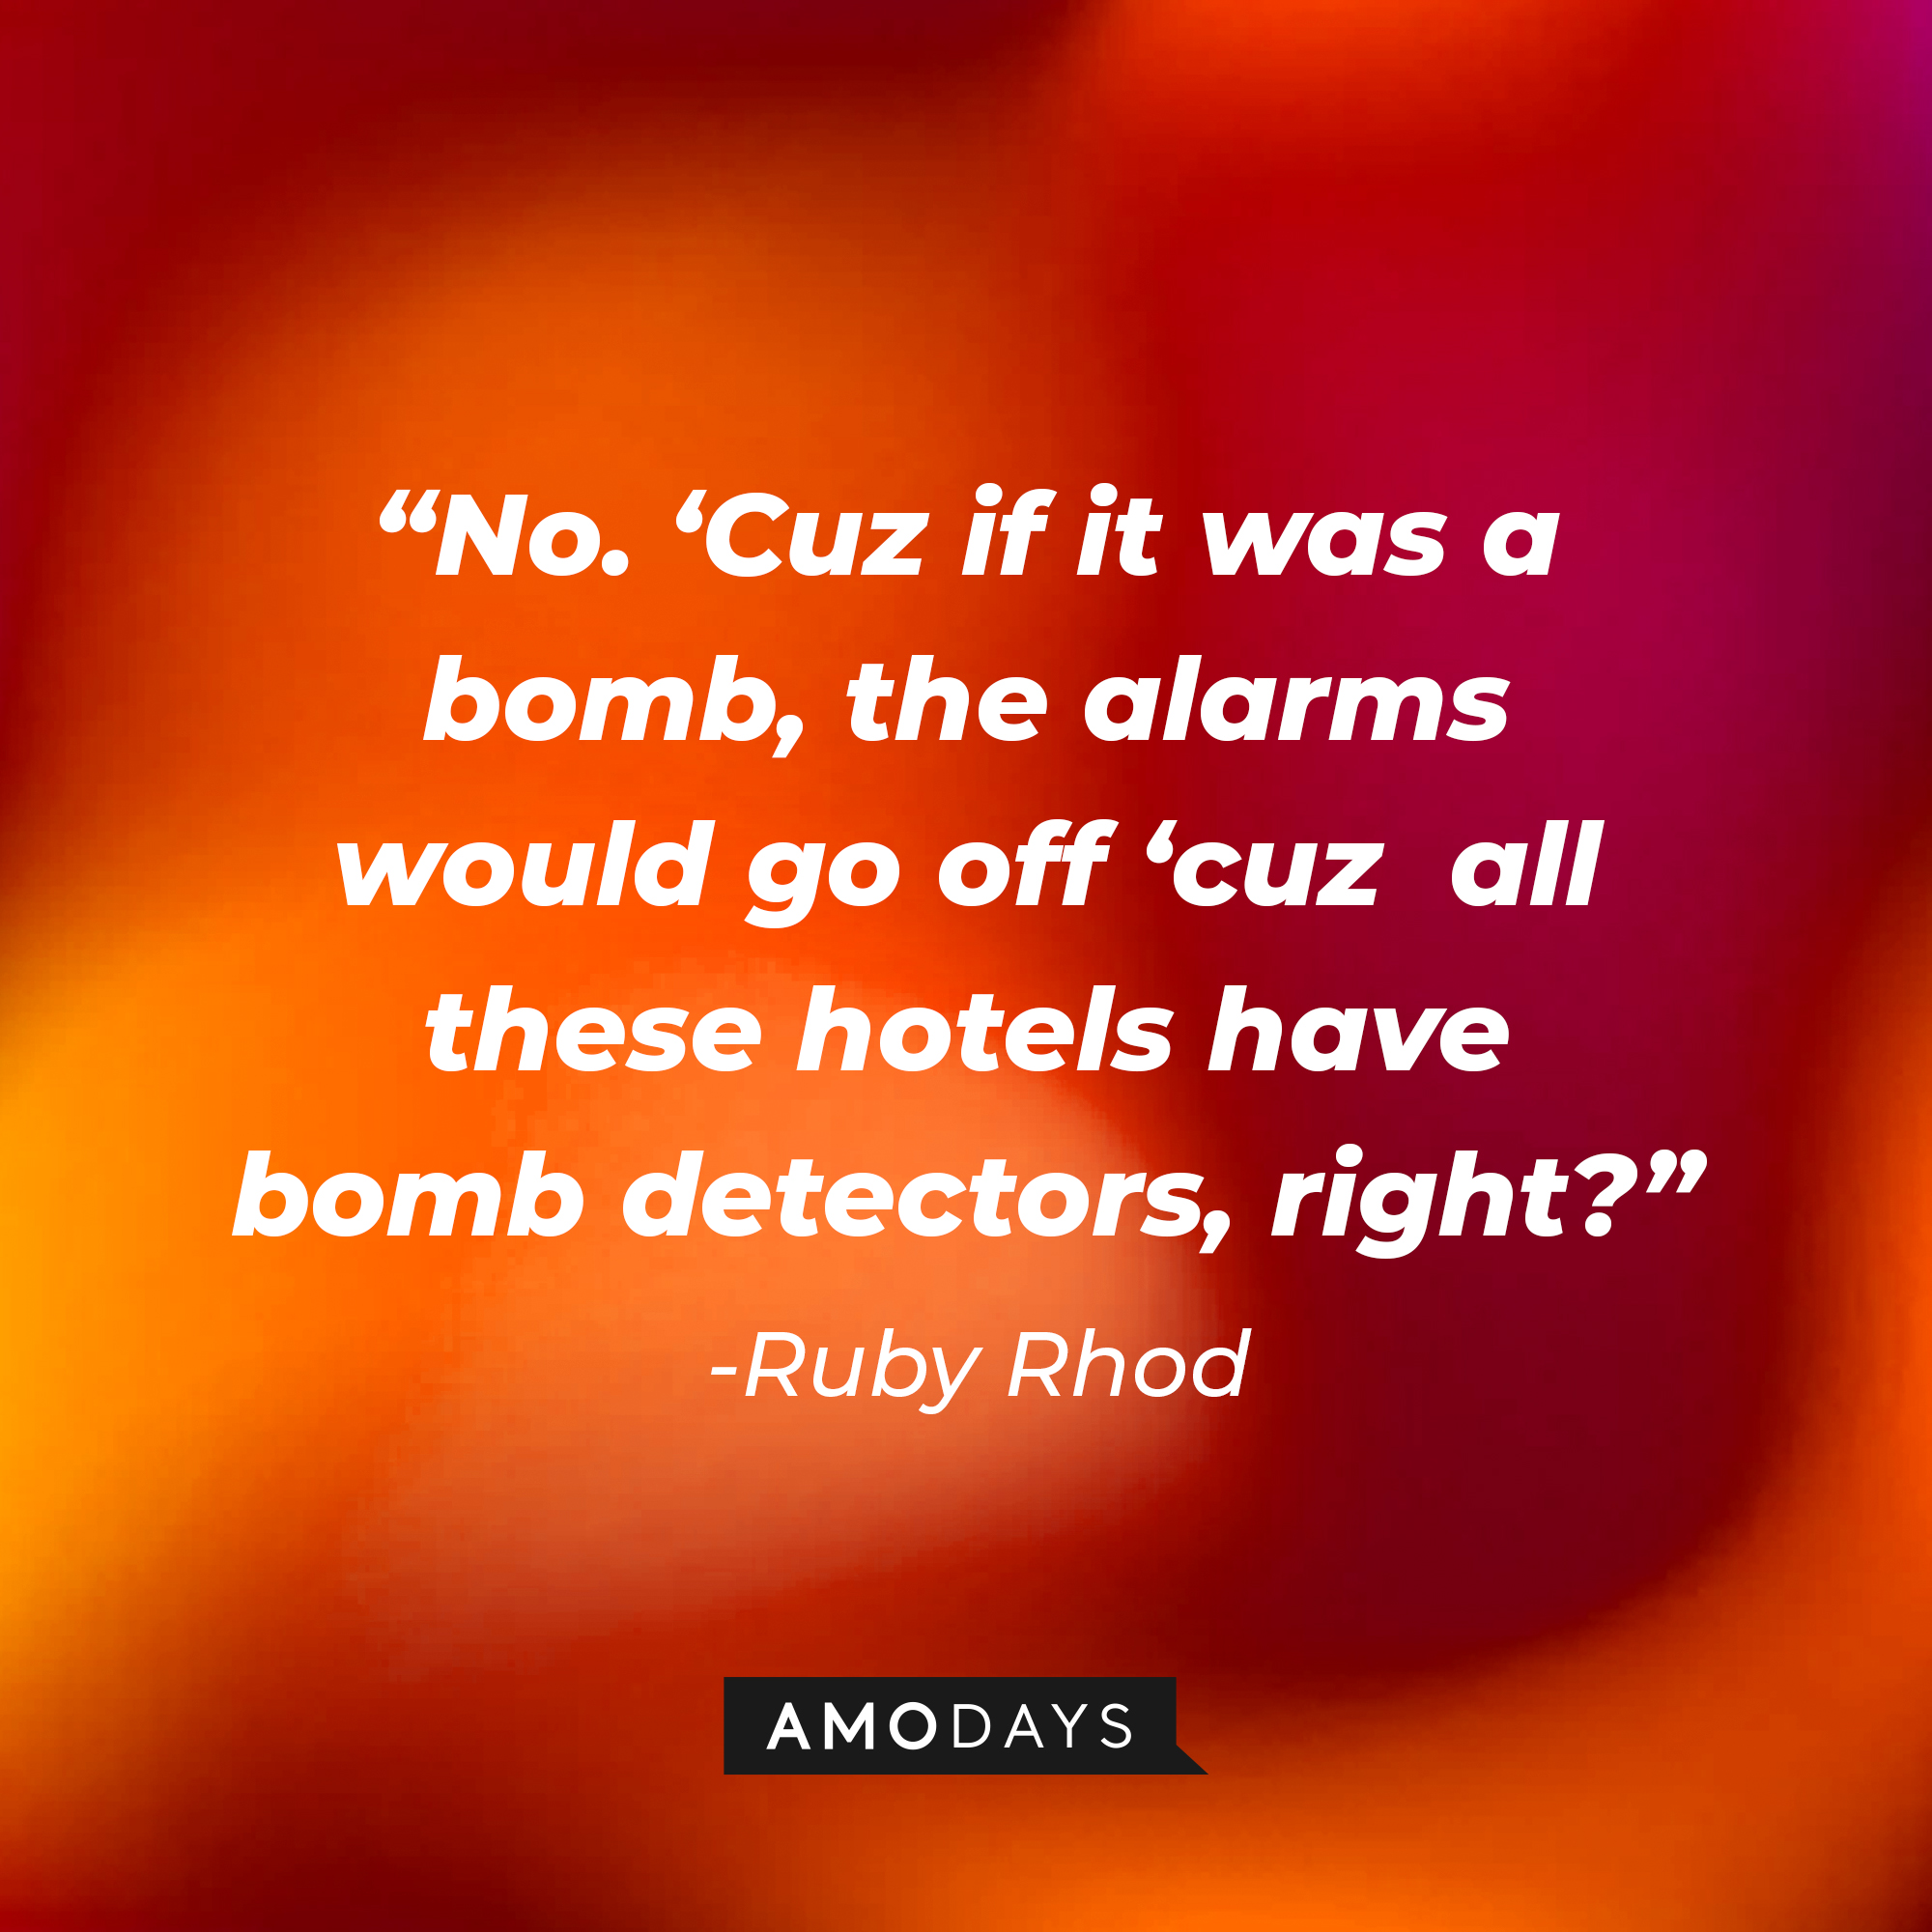 Ruby Rhod's quote: "No, 'Cuz if it was a bomb, the alarms would go off 'cuz all these hotels have bomb detectors, right?" | Source: Amodays